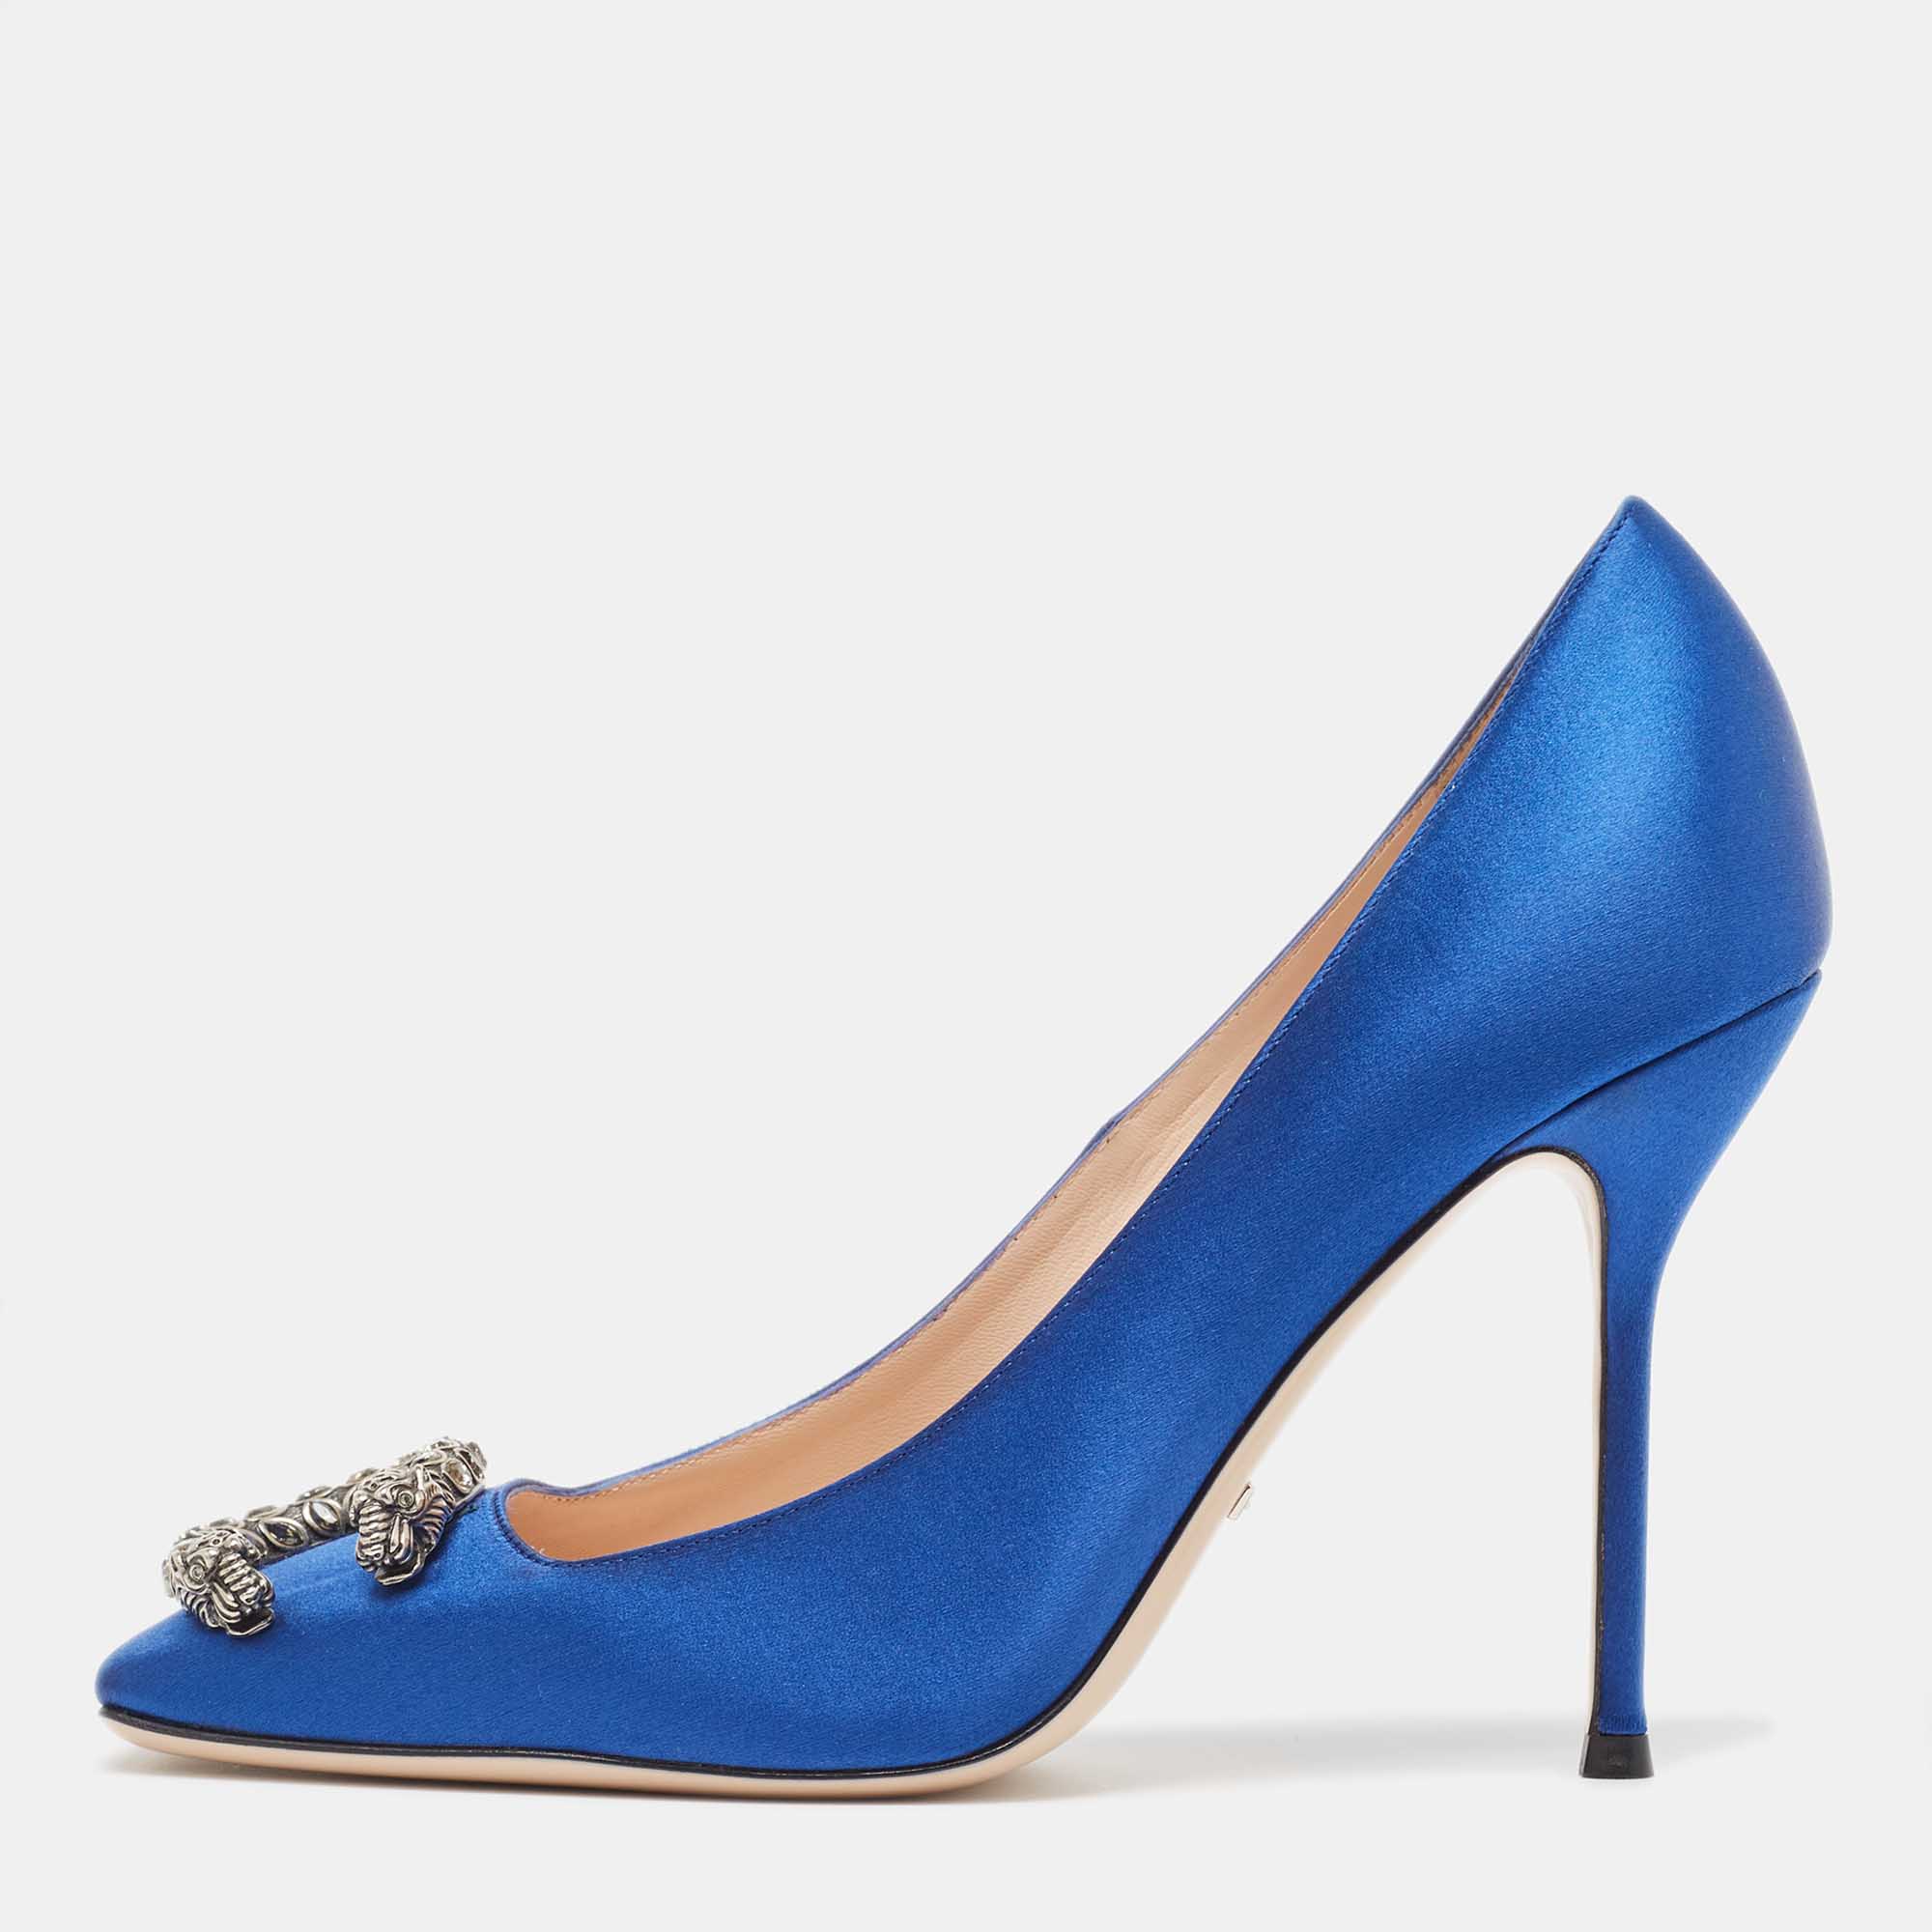 Pre-owned Gucci Blue Satin Dionysus Pumps Size 39